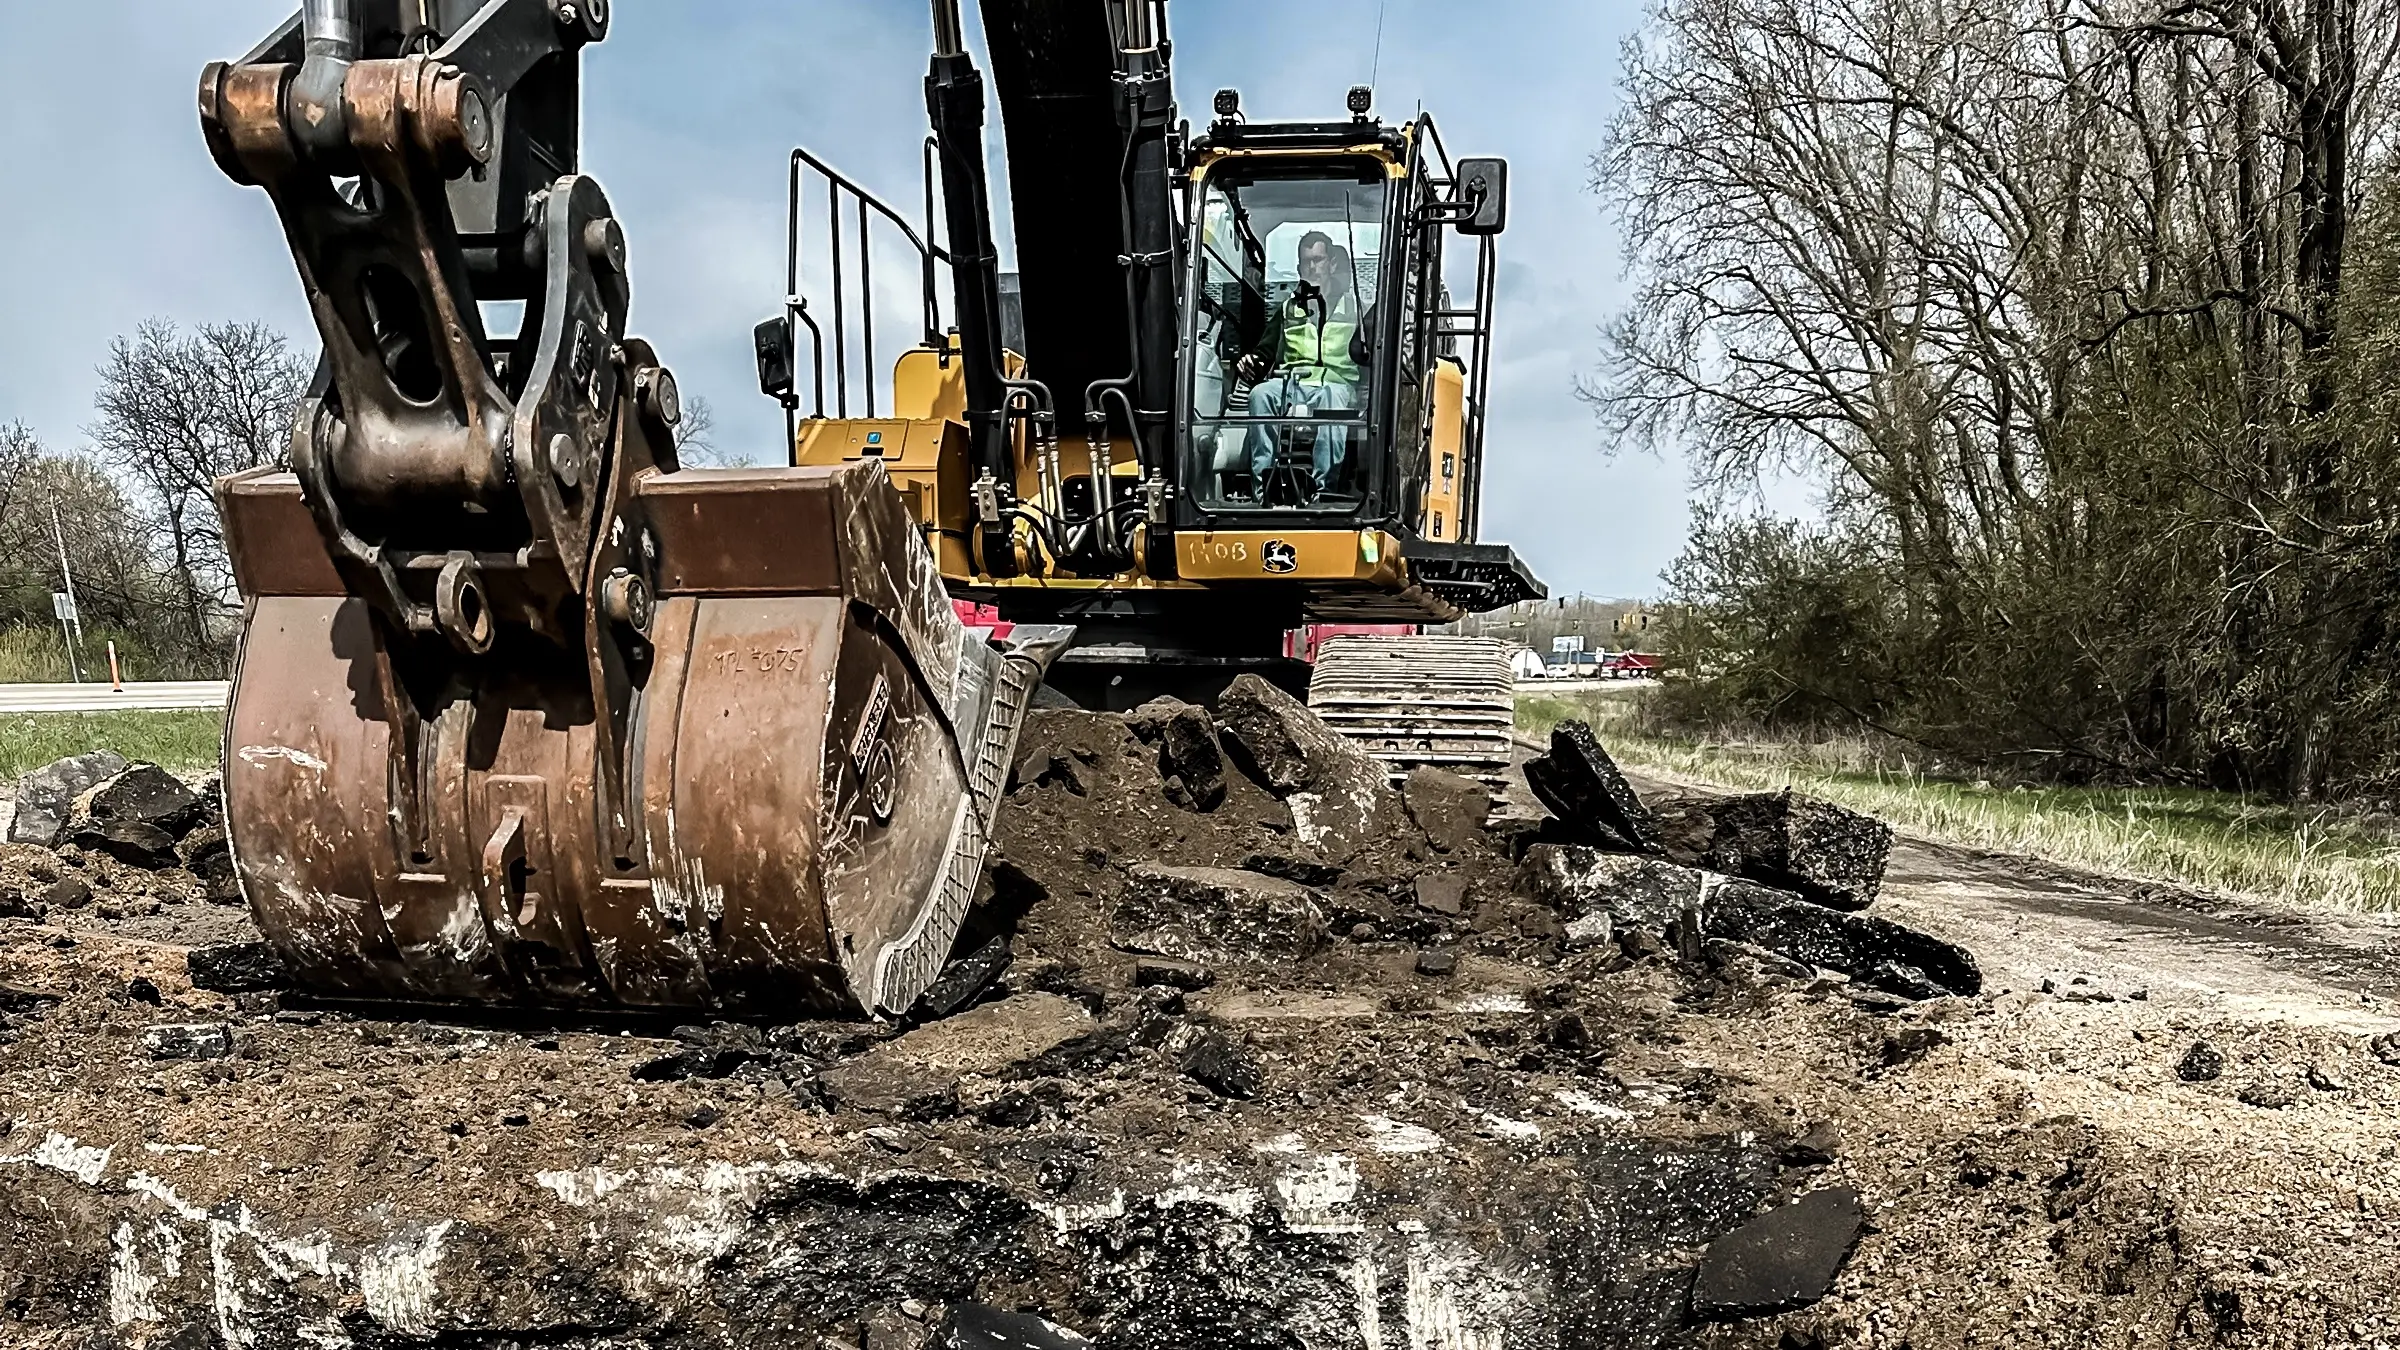 An excavator moves material from the ground.